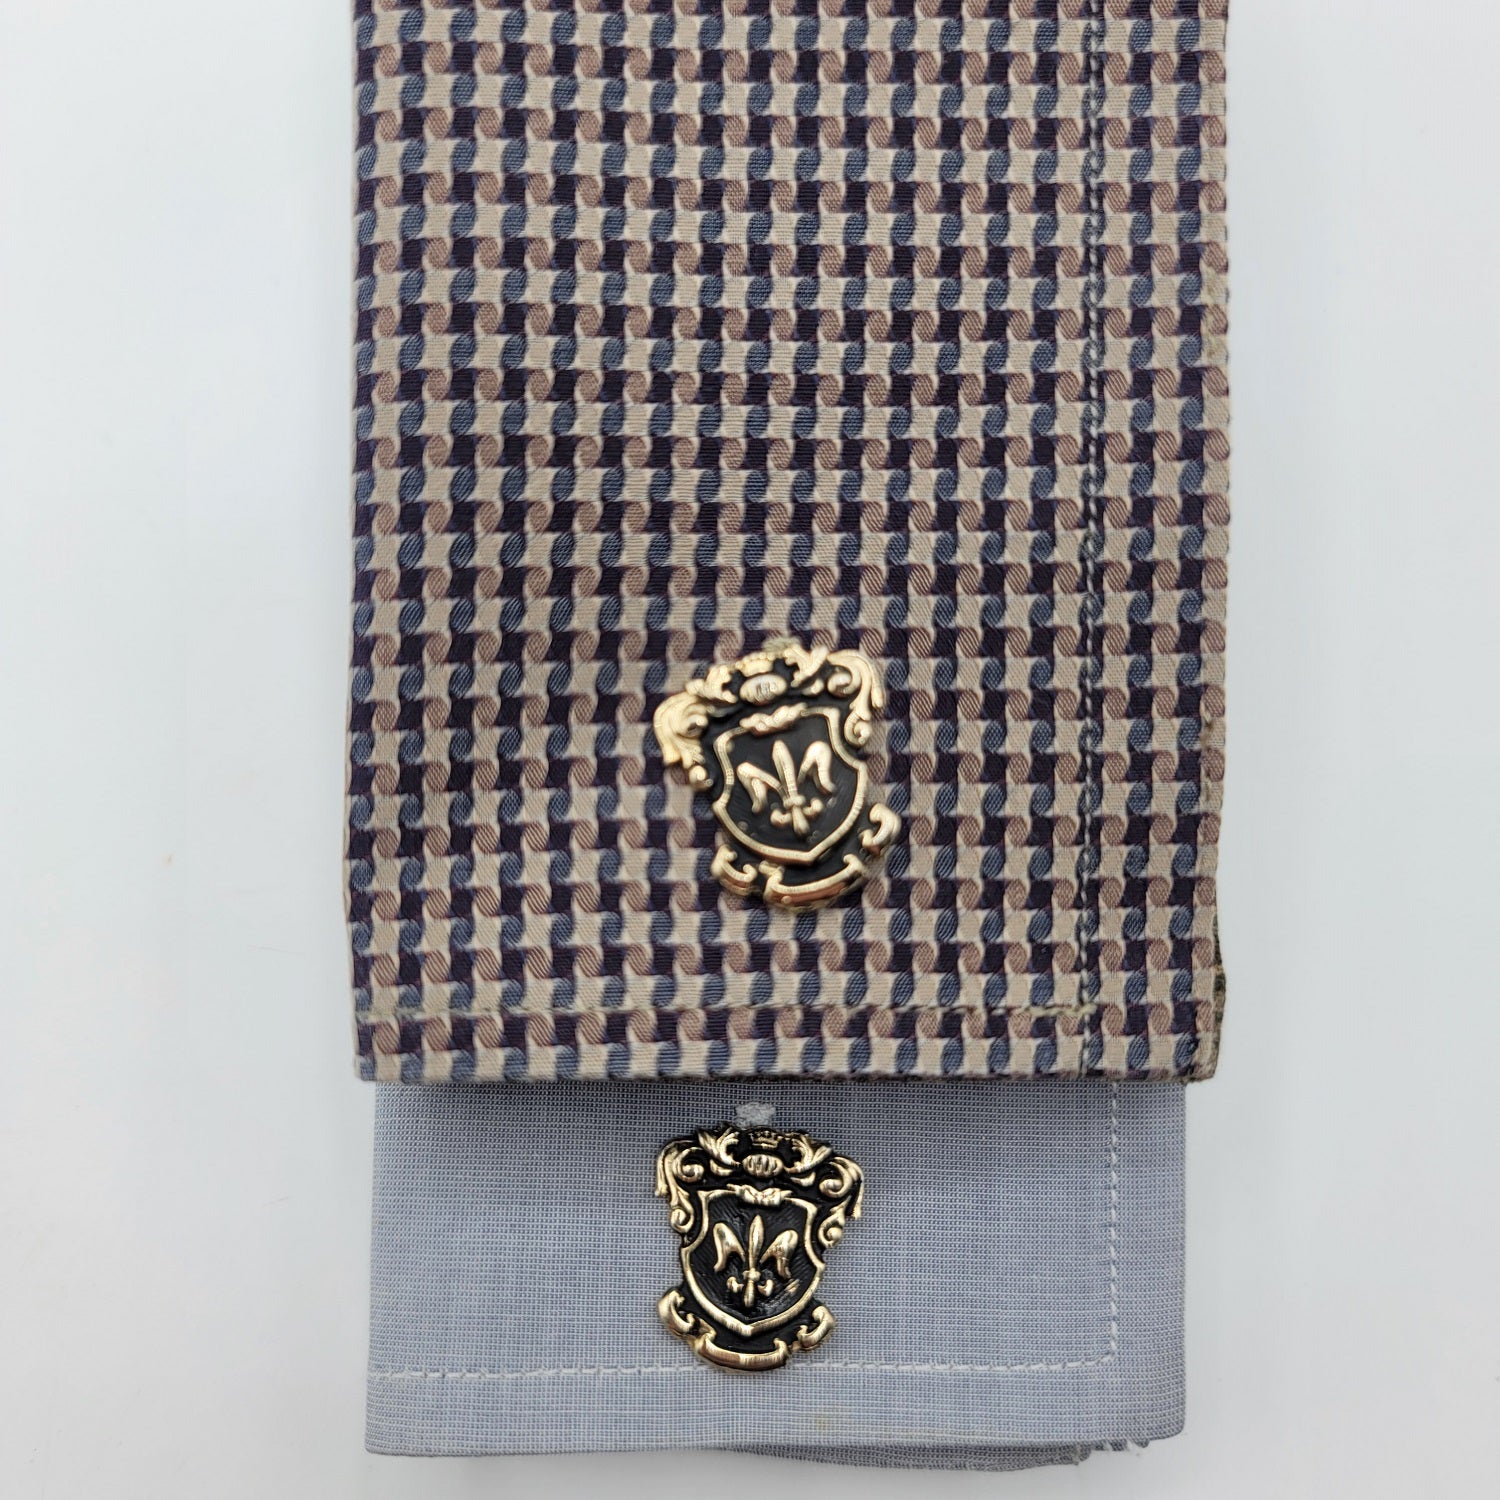 Bold and Unique Vintage Coat of Arms Cufflinks - Antiqued Finish